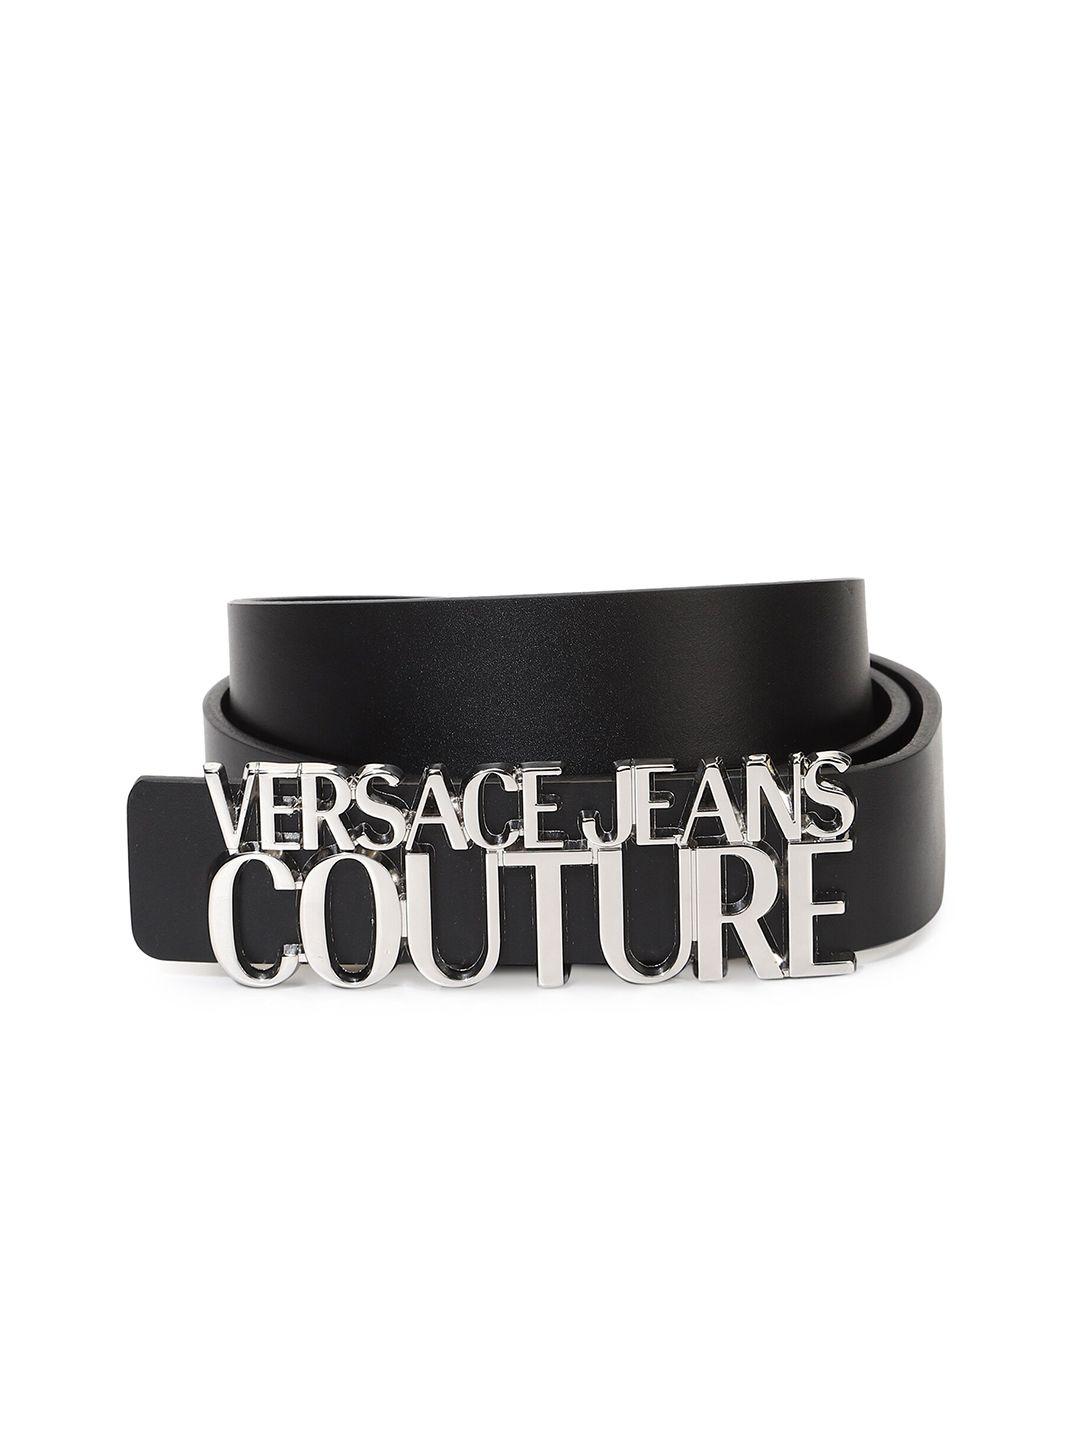 versace-jeans-couture-men-leather-wide-belt